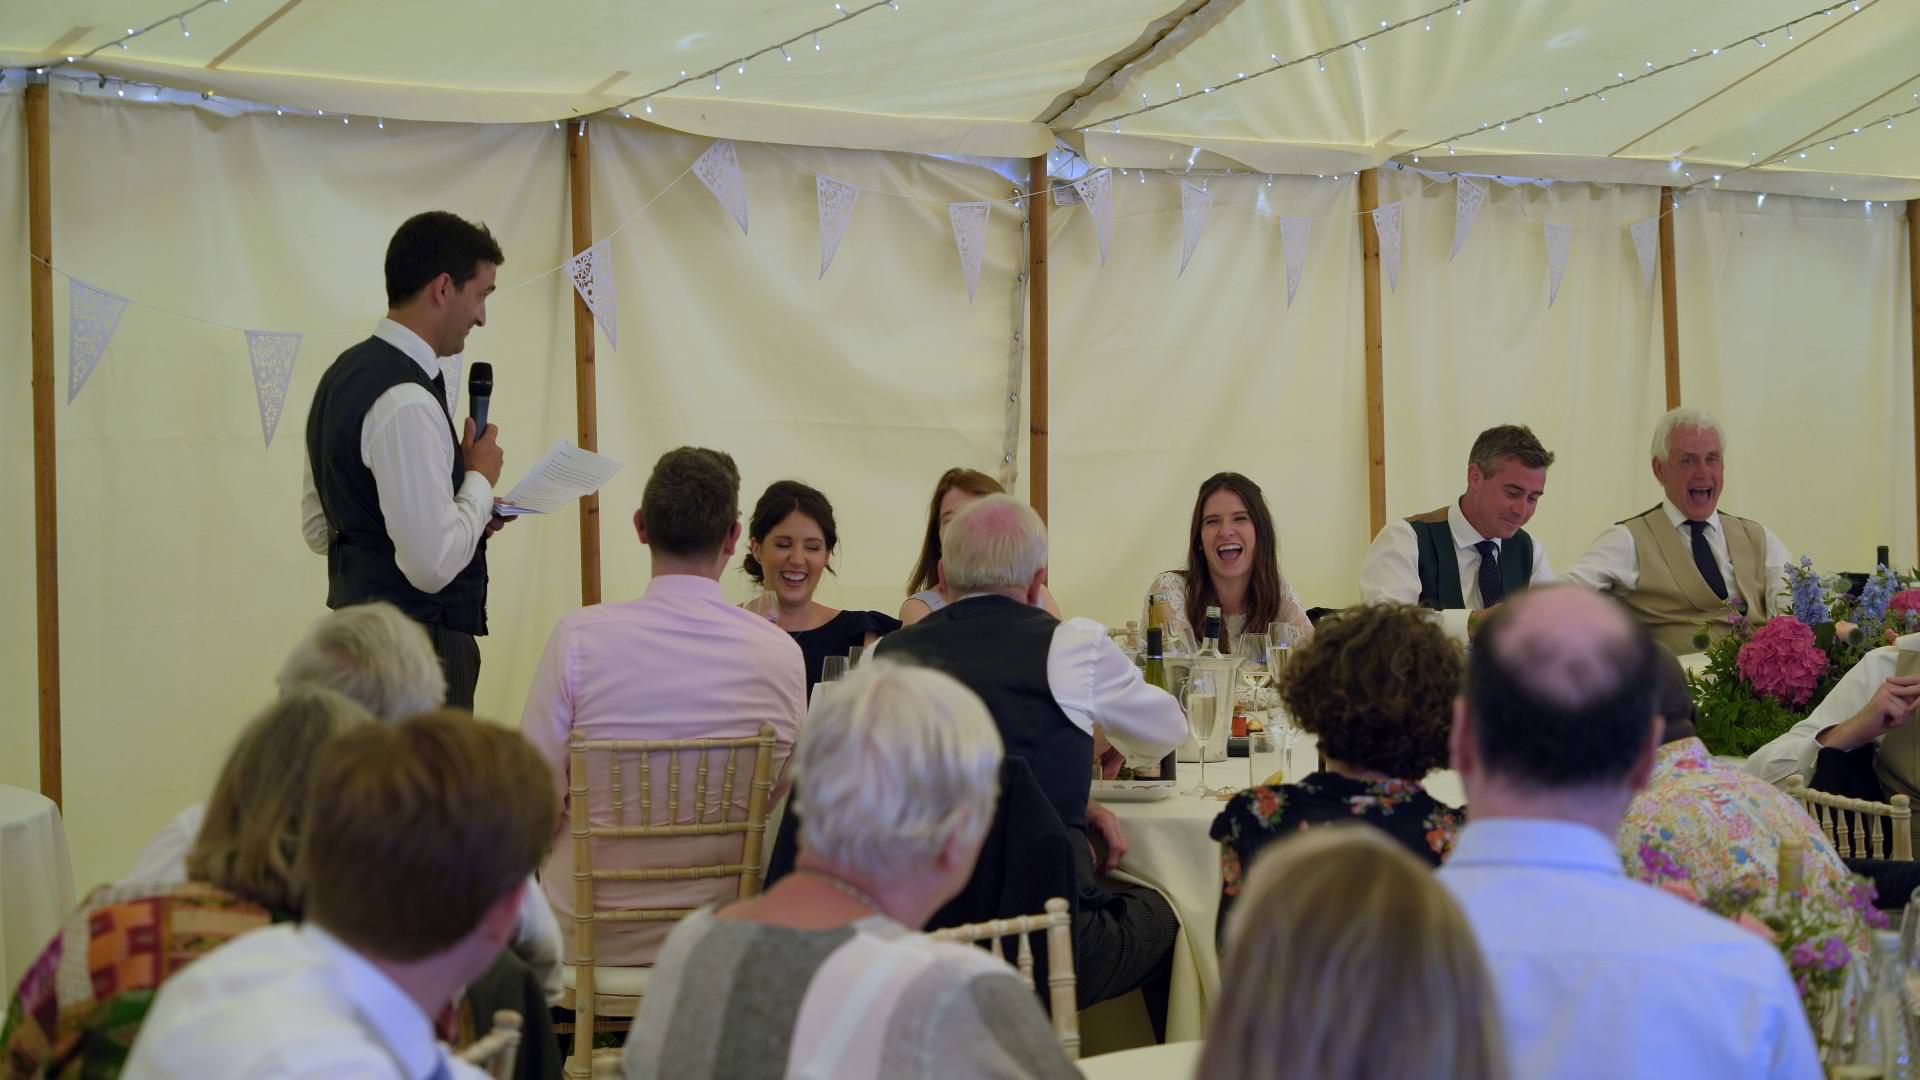 best man has everyone laughing during speeches